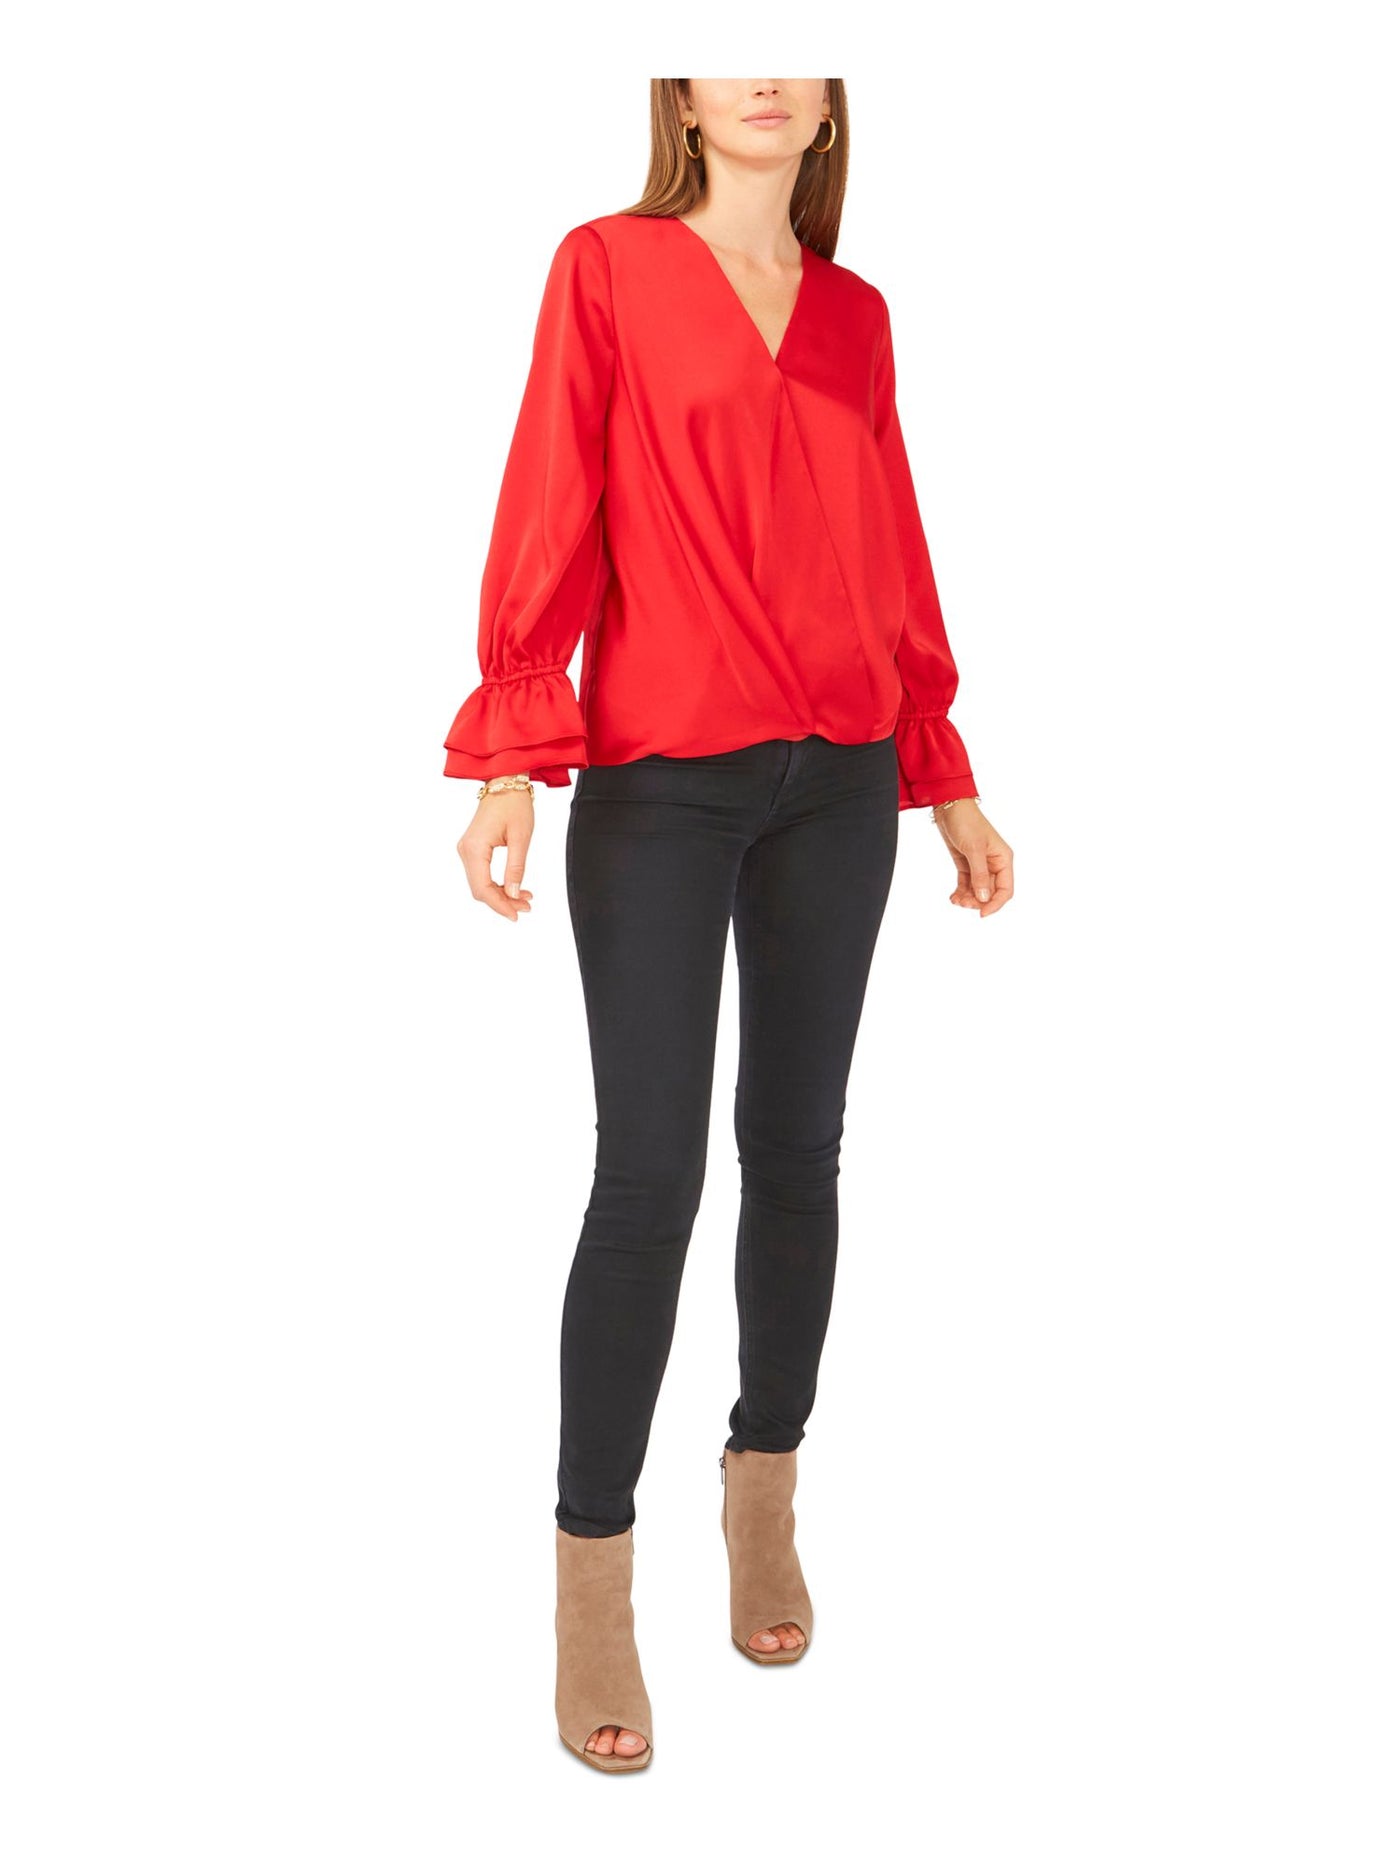 VINCE CAMUTO Womens Red Sheer Ruffled-cuff Long Sleeve Surplice Neckline Wear To Work Faux Wrap Top M